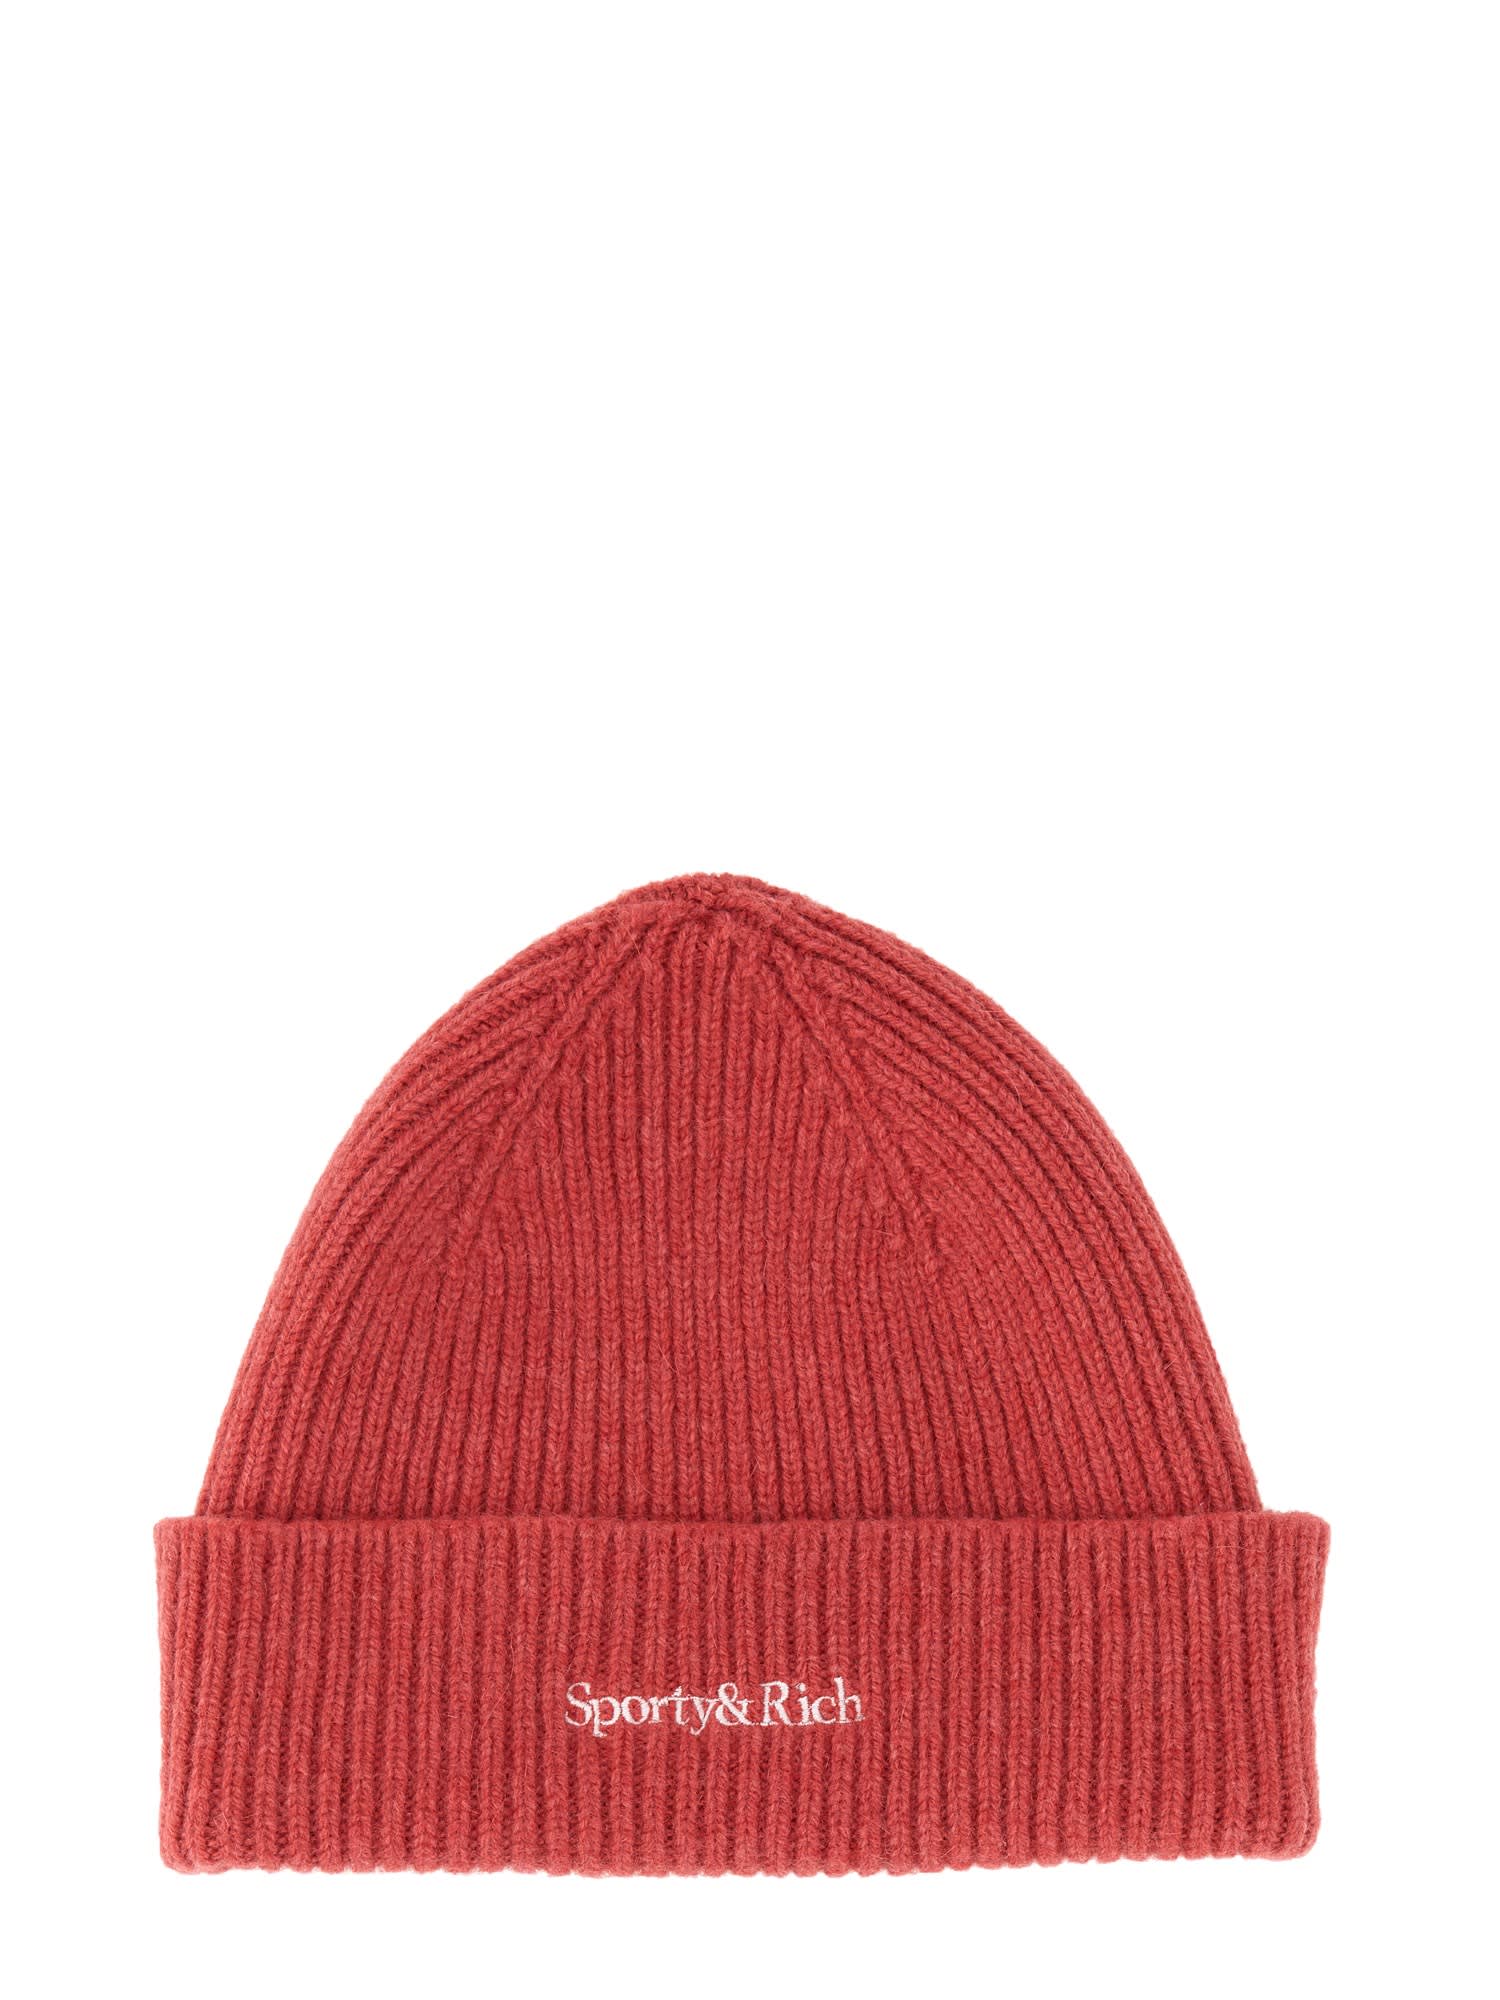 Sporty & Rich Beanie Hat With Logo Embroidery